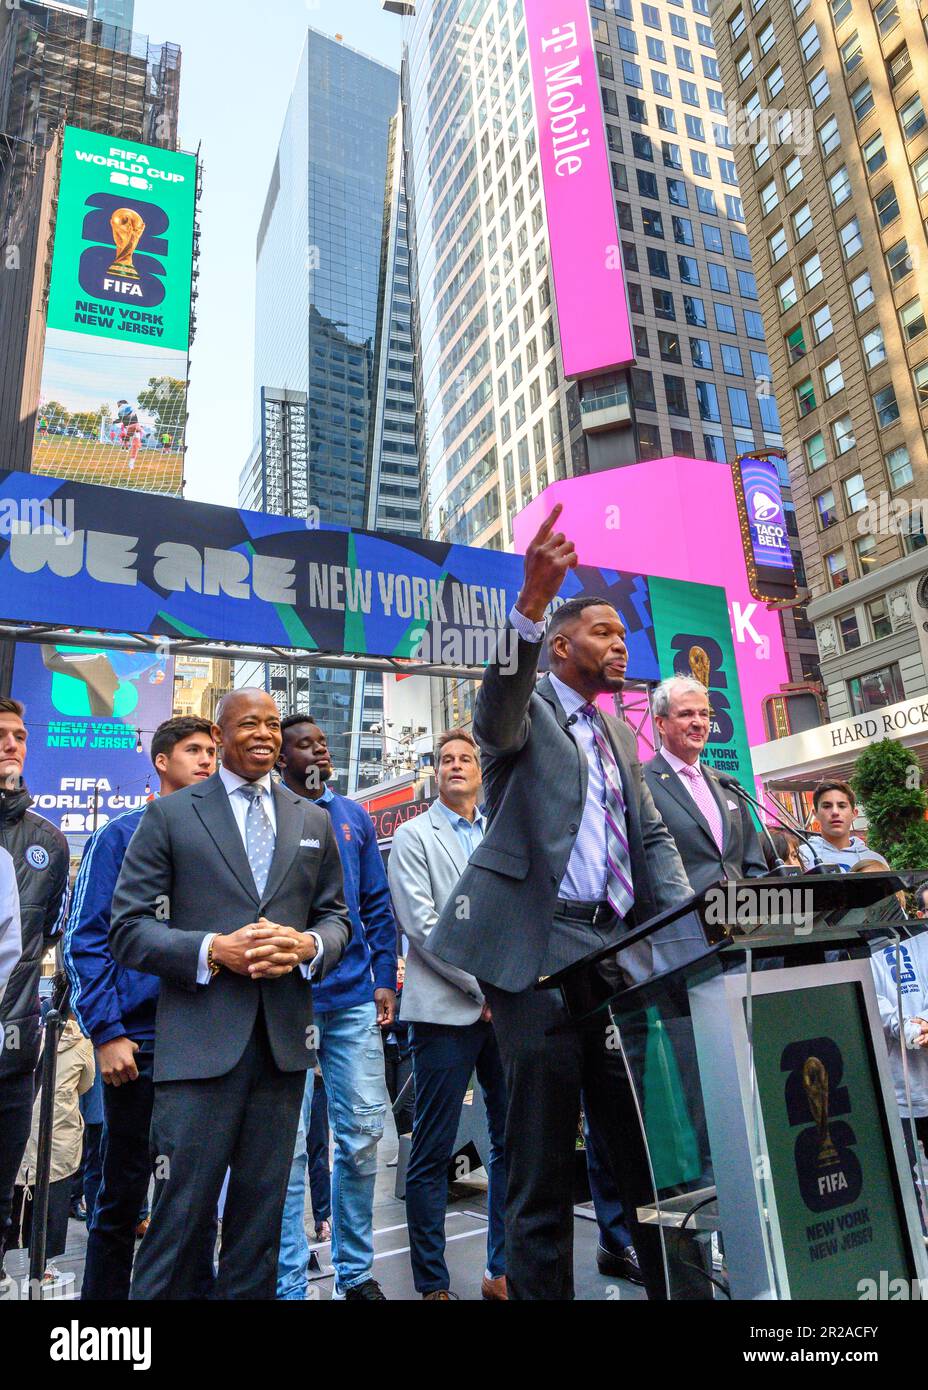 New York, USA. 18th May, 2023. Former footballer Michael Strahan (C) is flanked by New York City Mayor Eric Adams (L) and New Jersey Governor Phil Murphy (R) at a FIFA World Cup 2026 New York/New Jersey Launch Event in Times Square. The event unveiled the official themes for the MetLife stadium matches: 'We are NYNJ' and 'We are 26'. The world's top soccer competition is already planning to host 8 matches in the New York/New Jersey area and the local organizers want to host the final game here too. Credit: Enrique Shore/Alamy Live News Stock Photo